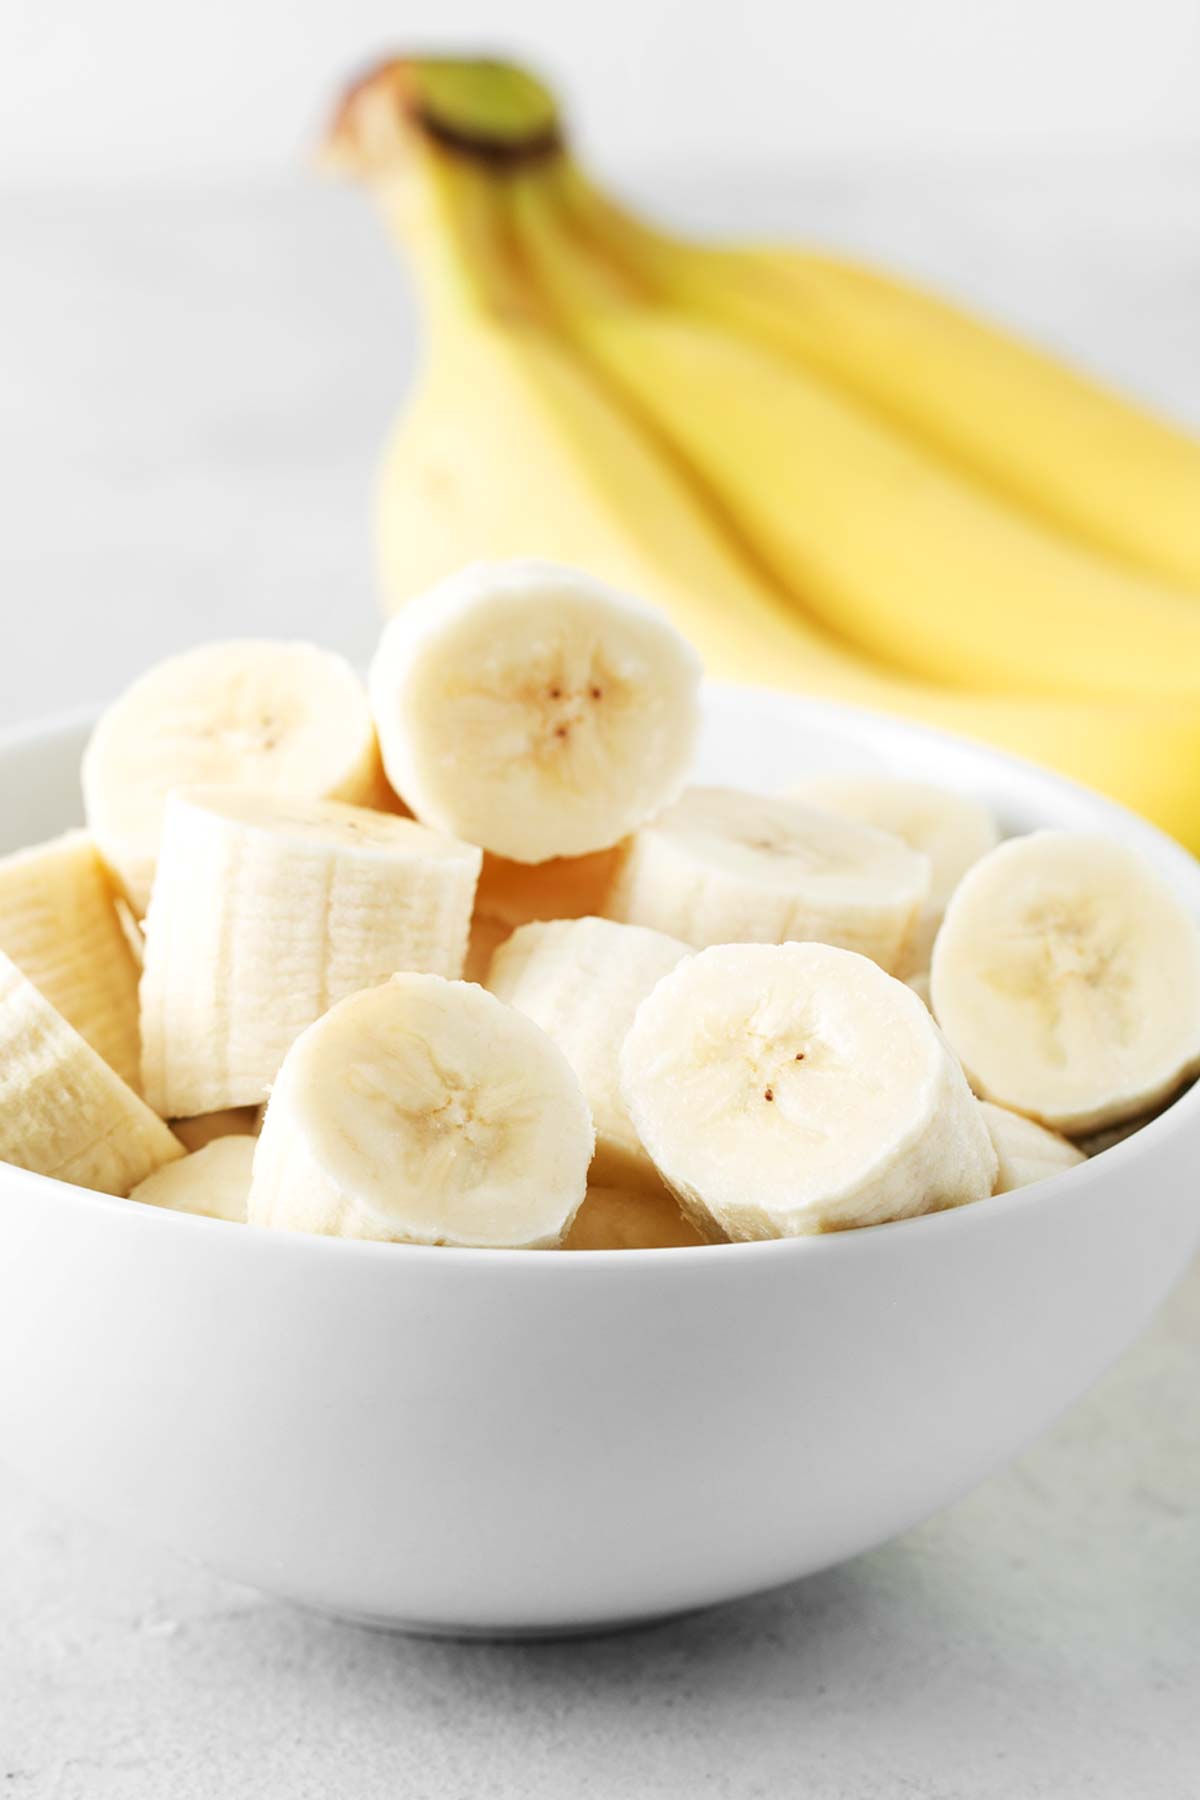 Sliced bananas in a white bowl with whole bananas in the background.